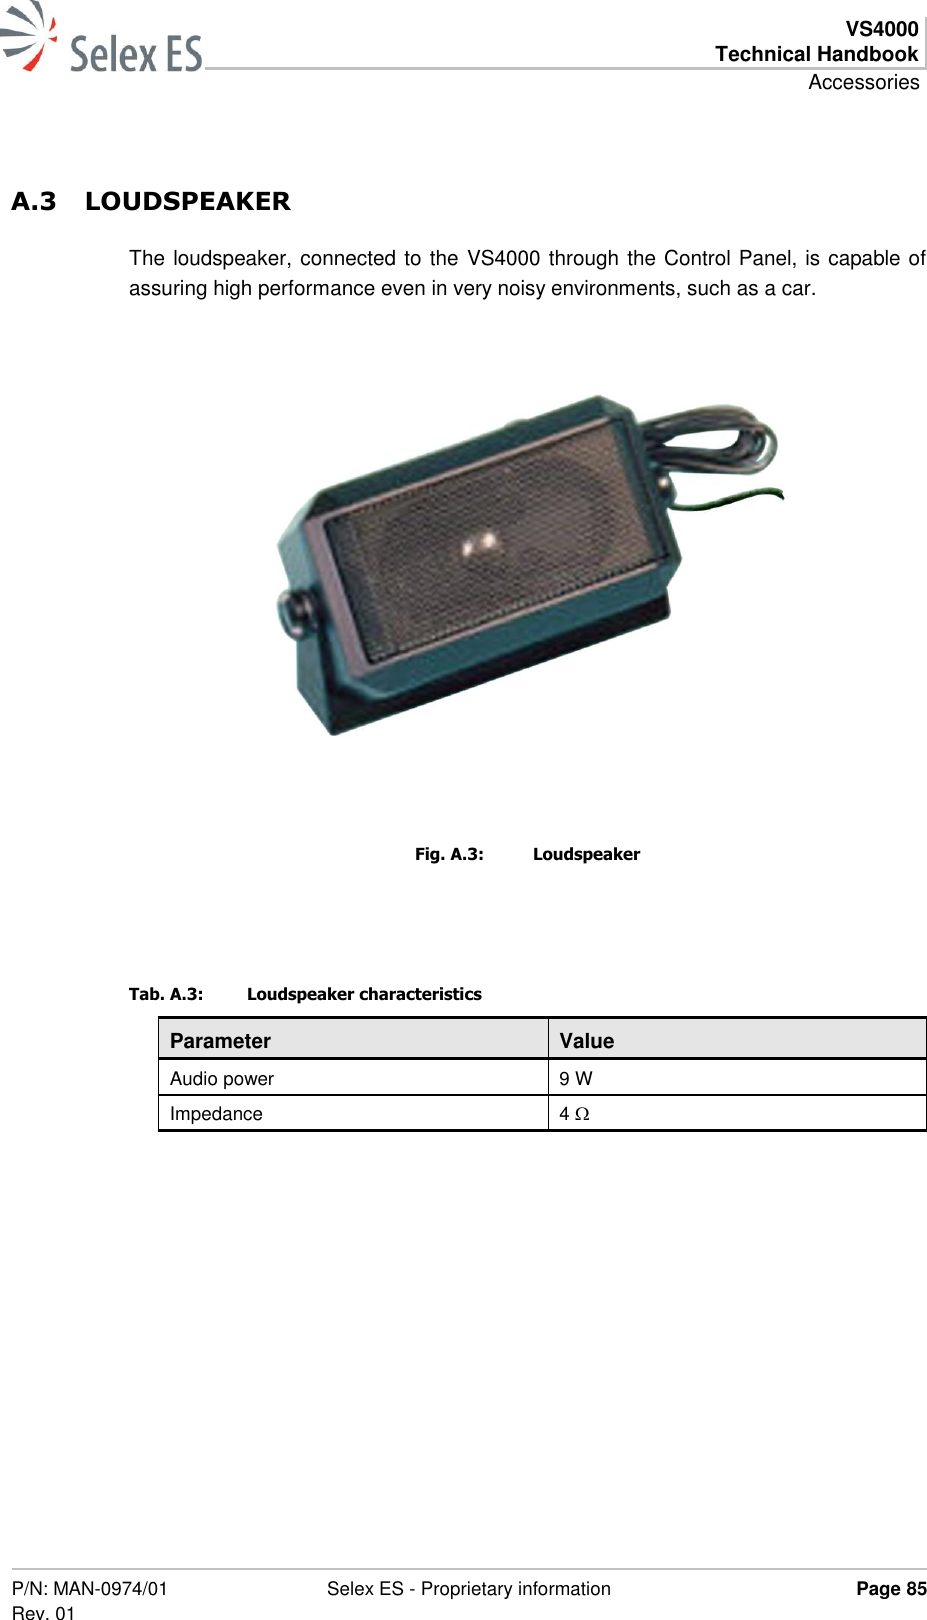  VS4000 Technical Handbook Accessories  P/N: MAN-0974/01 Rev. 01 Selex ES - Proprietary information Page 85  A.3 LOUDSPEAKER The loudspeaker, connected to the VS4000 through the Control Panel, is capable of assuring high performance even in very noisy environments, such as a car.      Fig. A.3:  Loudspeaker  Tab. A.3:  Loudspeaker characteristics Parameter Value Audio power 9 W Impedance 4   